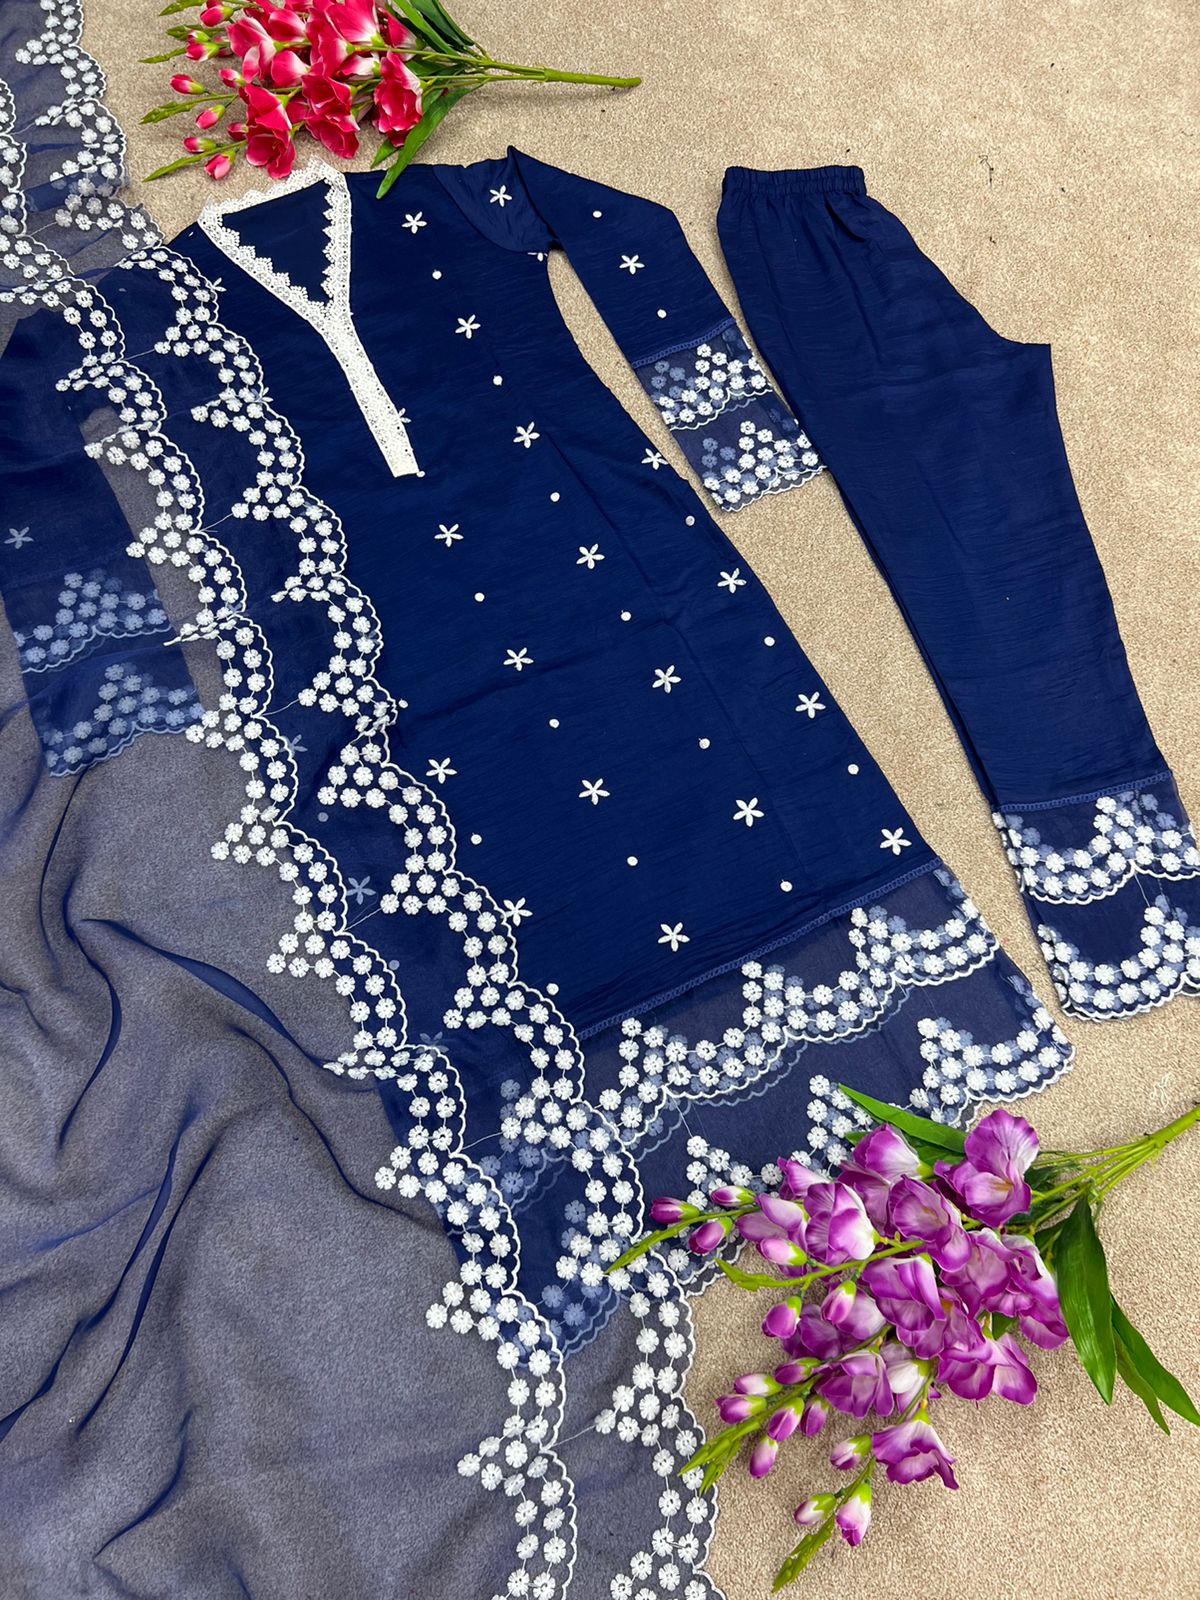 buy blue and white cotton kurti online